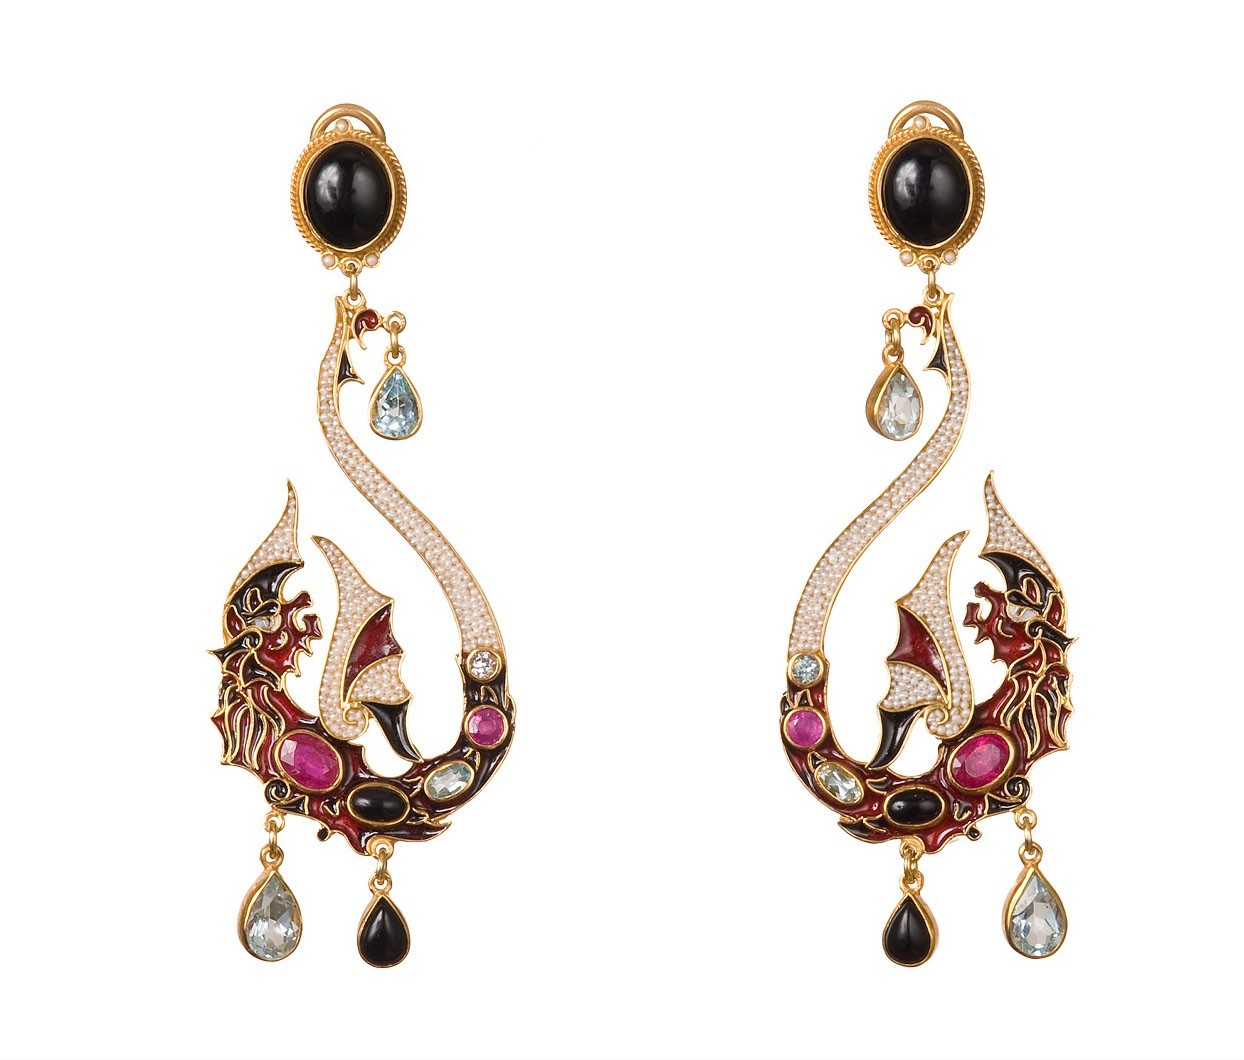 Dragons earrings handmade in Italy by Percossi Papi with natural stones